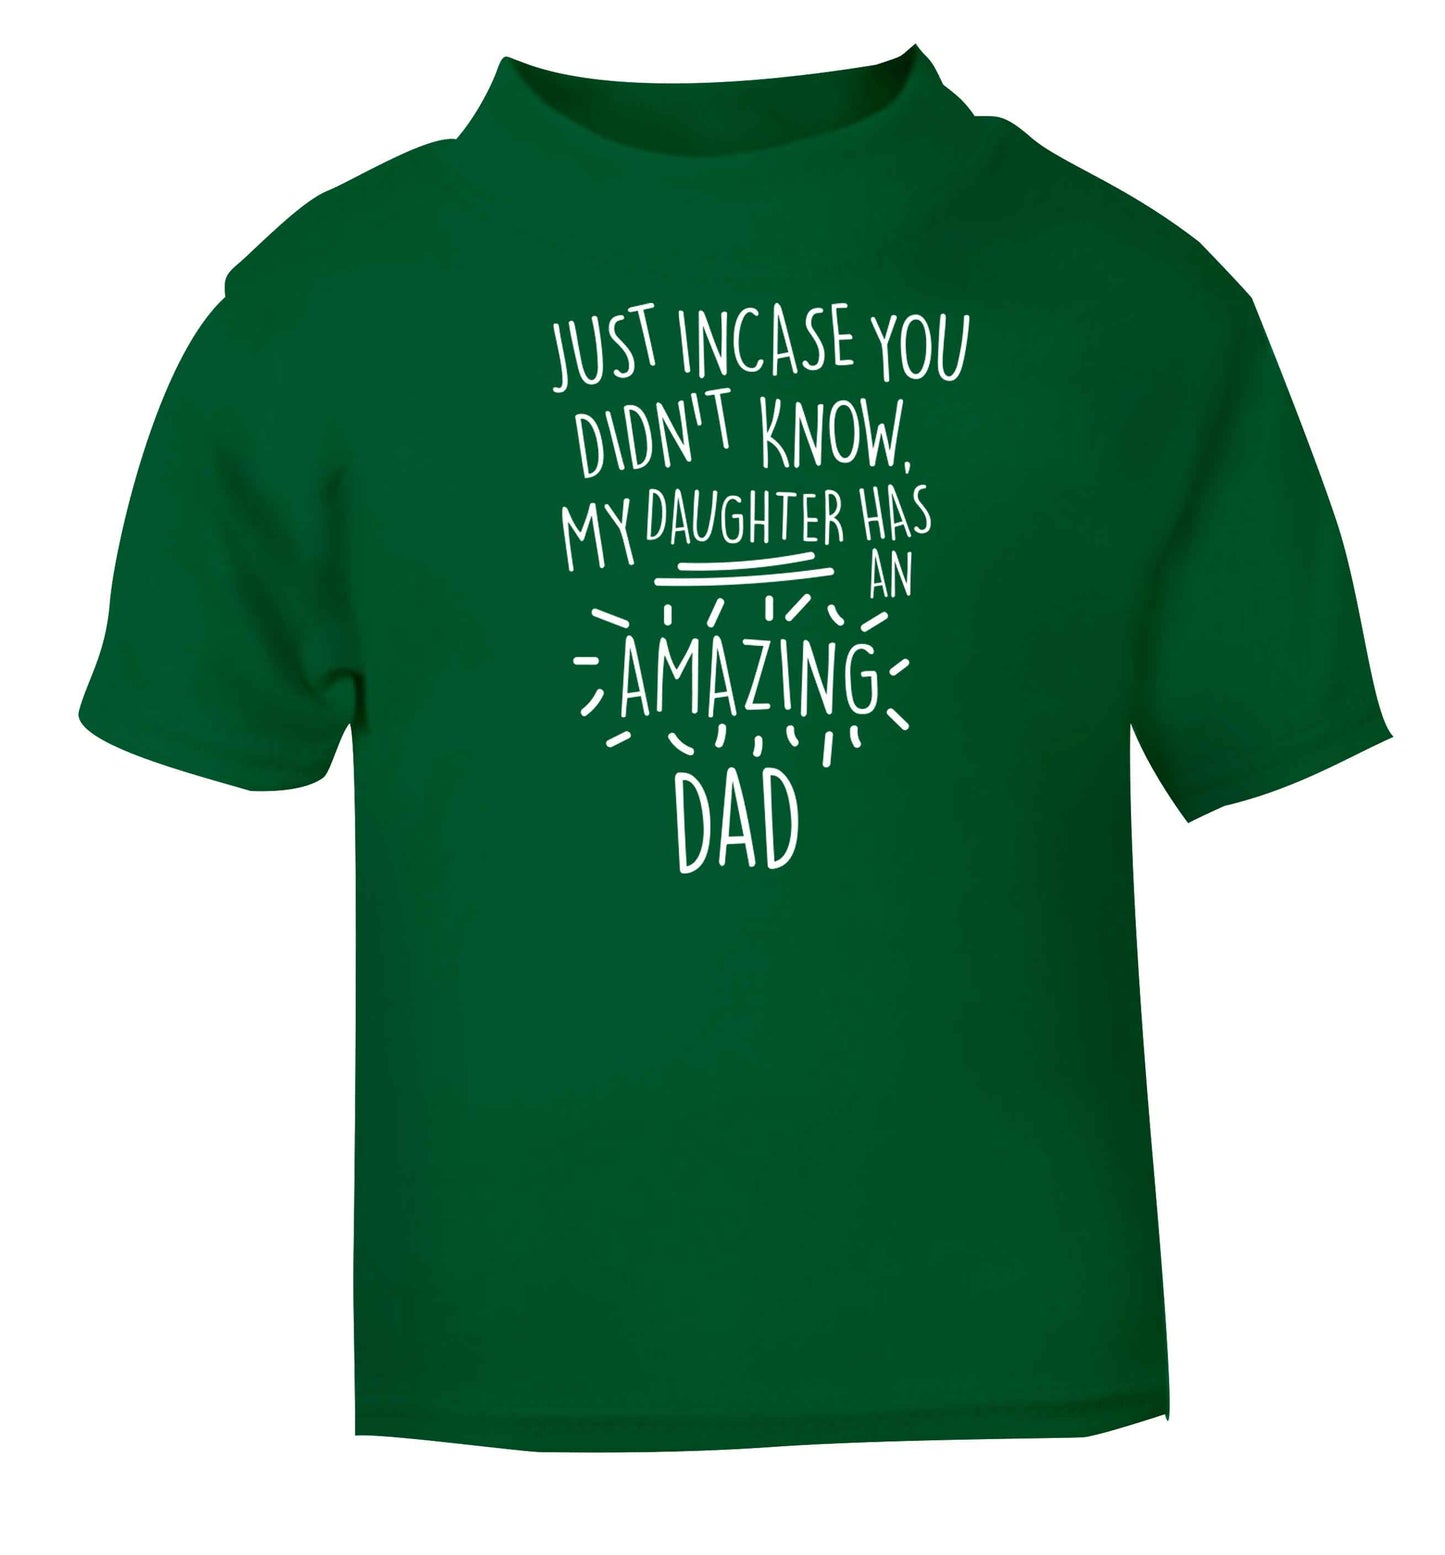 Just incase you didn't know my daughter has an amazing dad green baby toddler Tshirt 2 Years